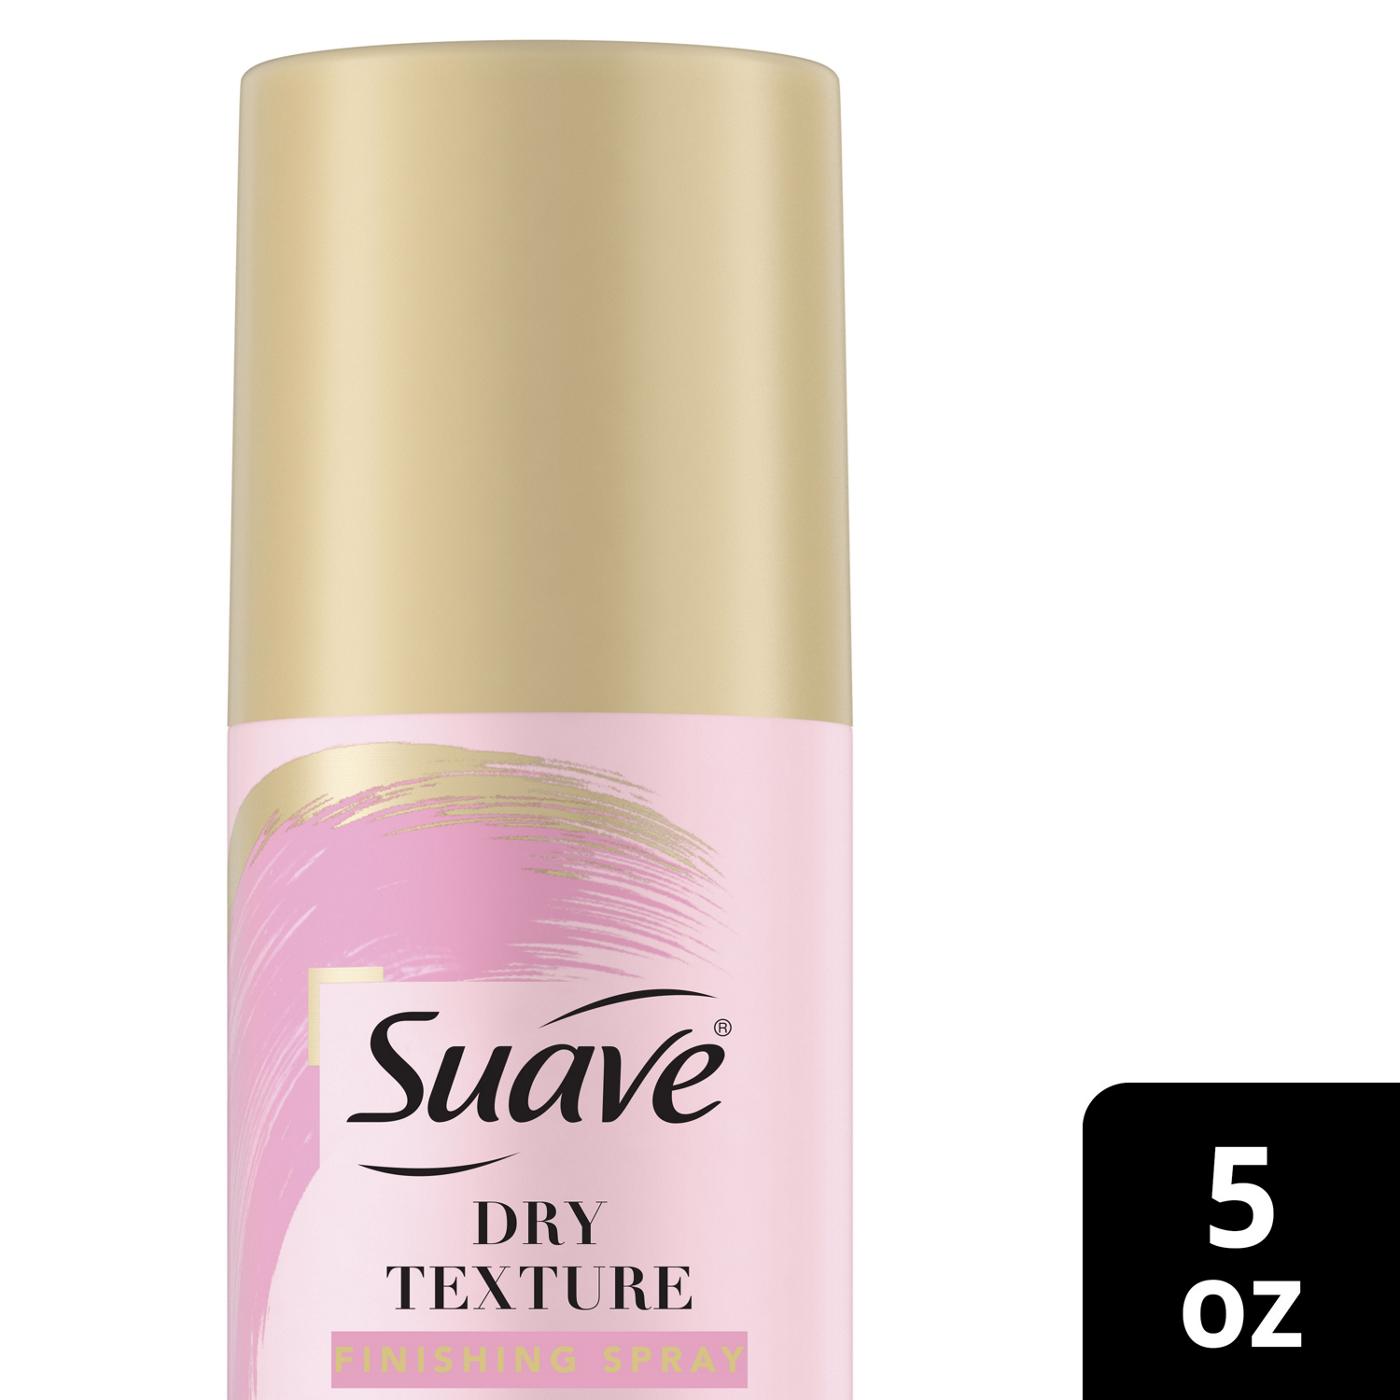 Suave Dry Texture Finishing Spray; image 8 of 8